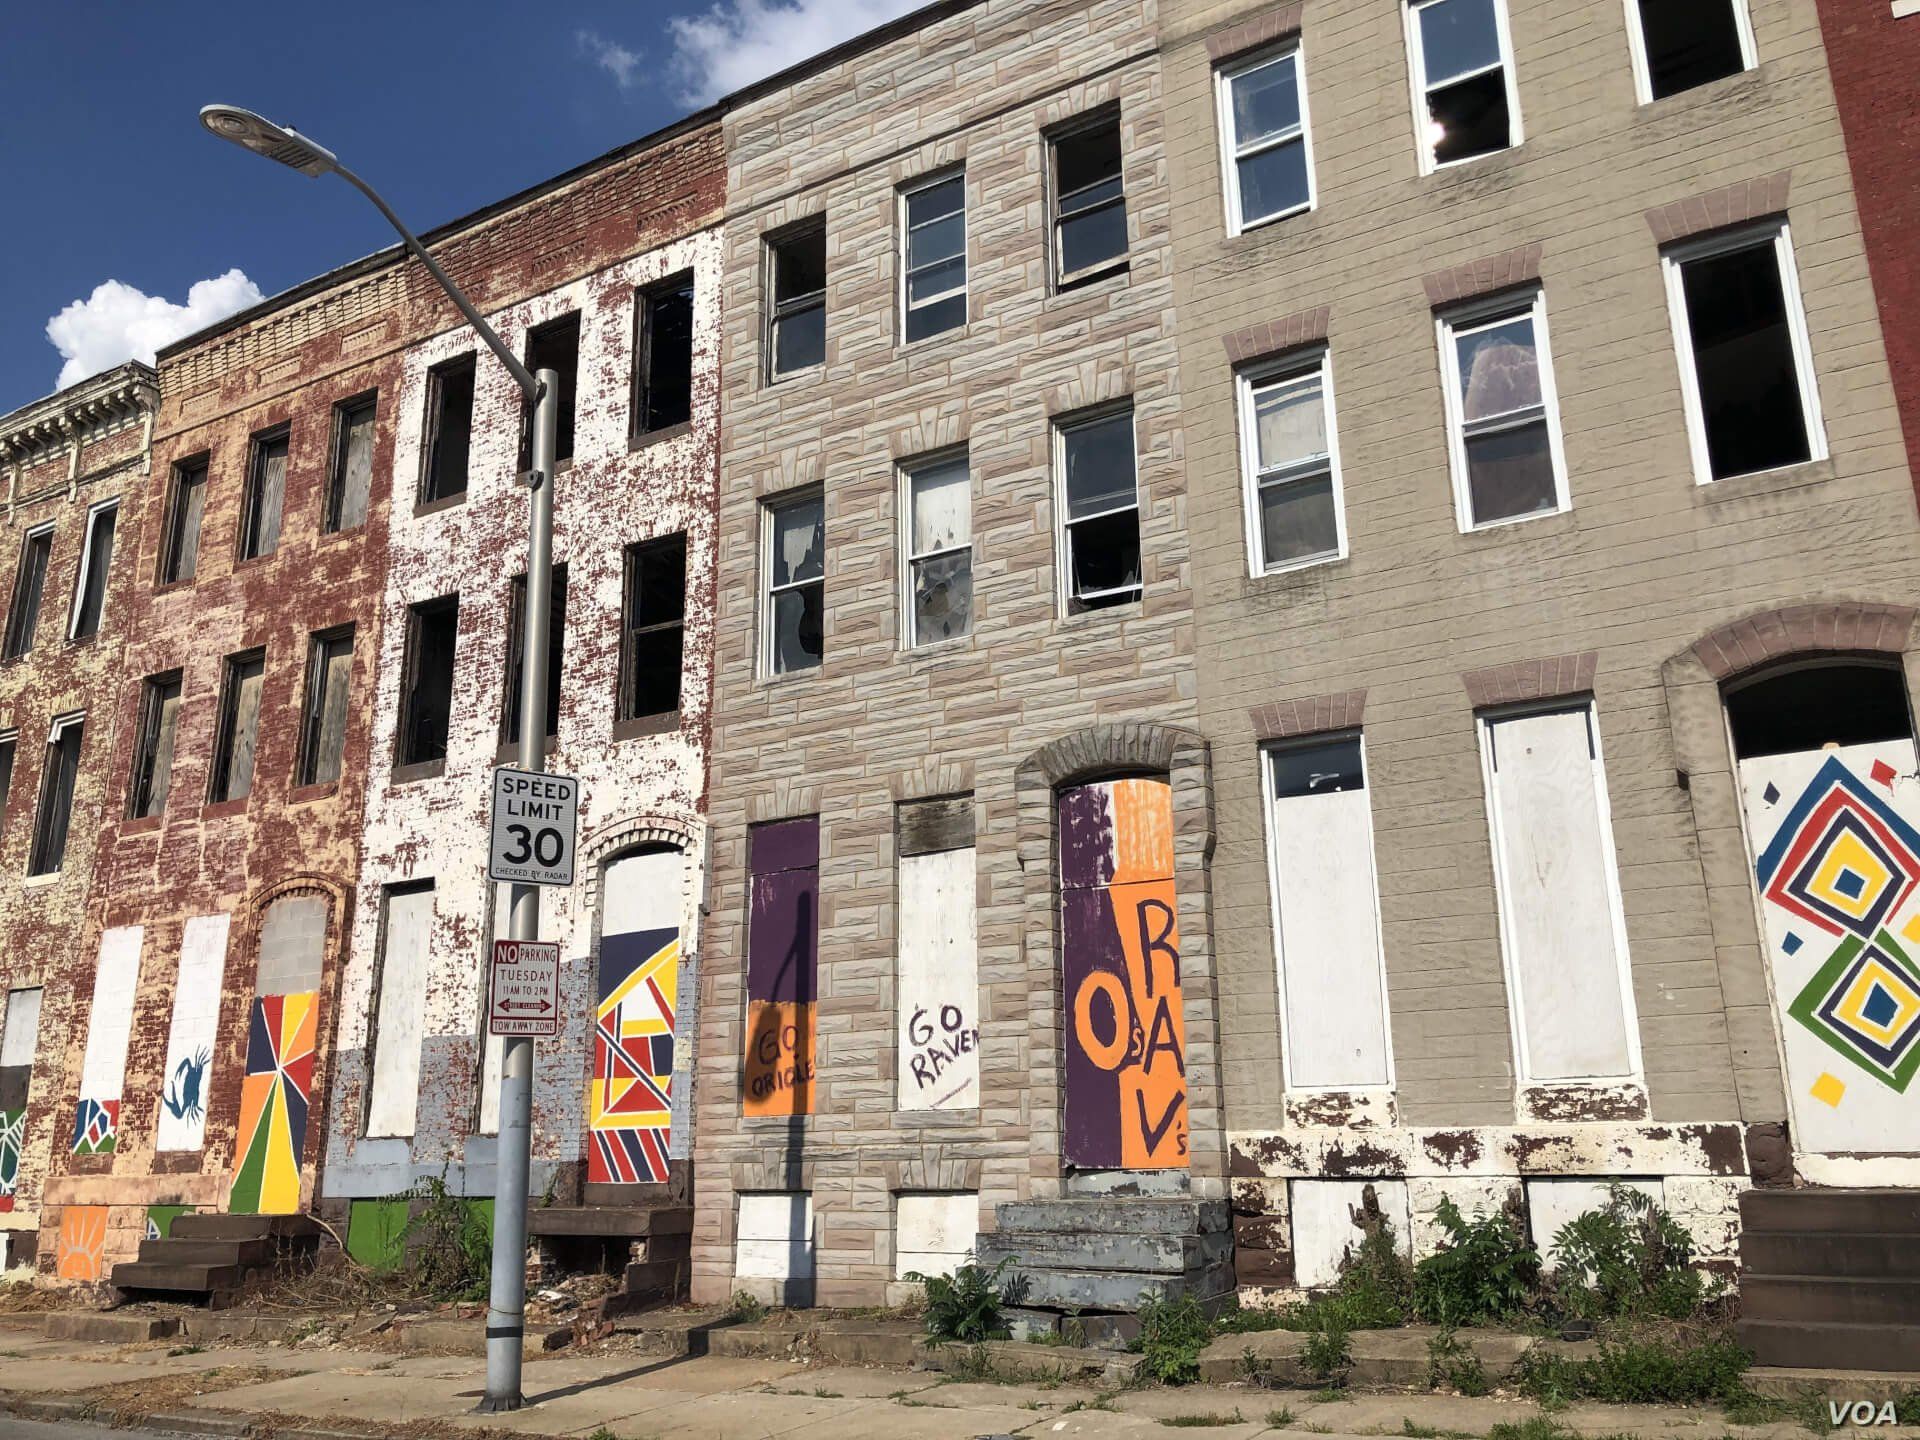 An entire block of vacant row houses in West Baltimore, within the 7th Congressional District of Representative Elijah Cummings. (VOA/C. Presutti)